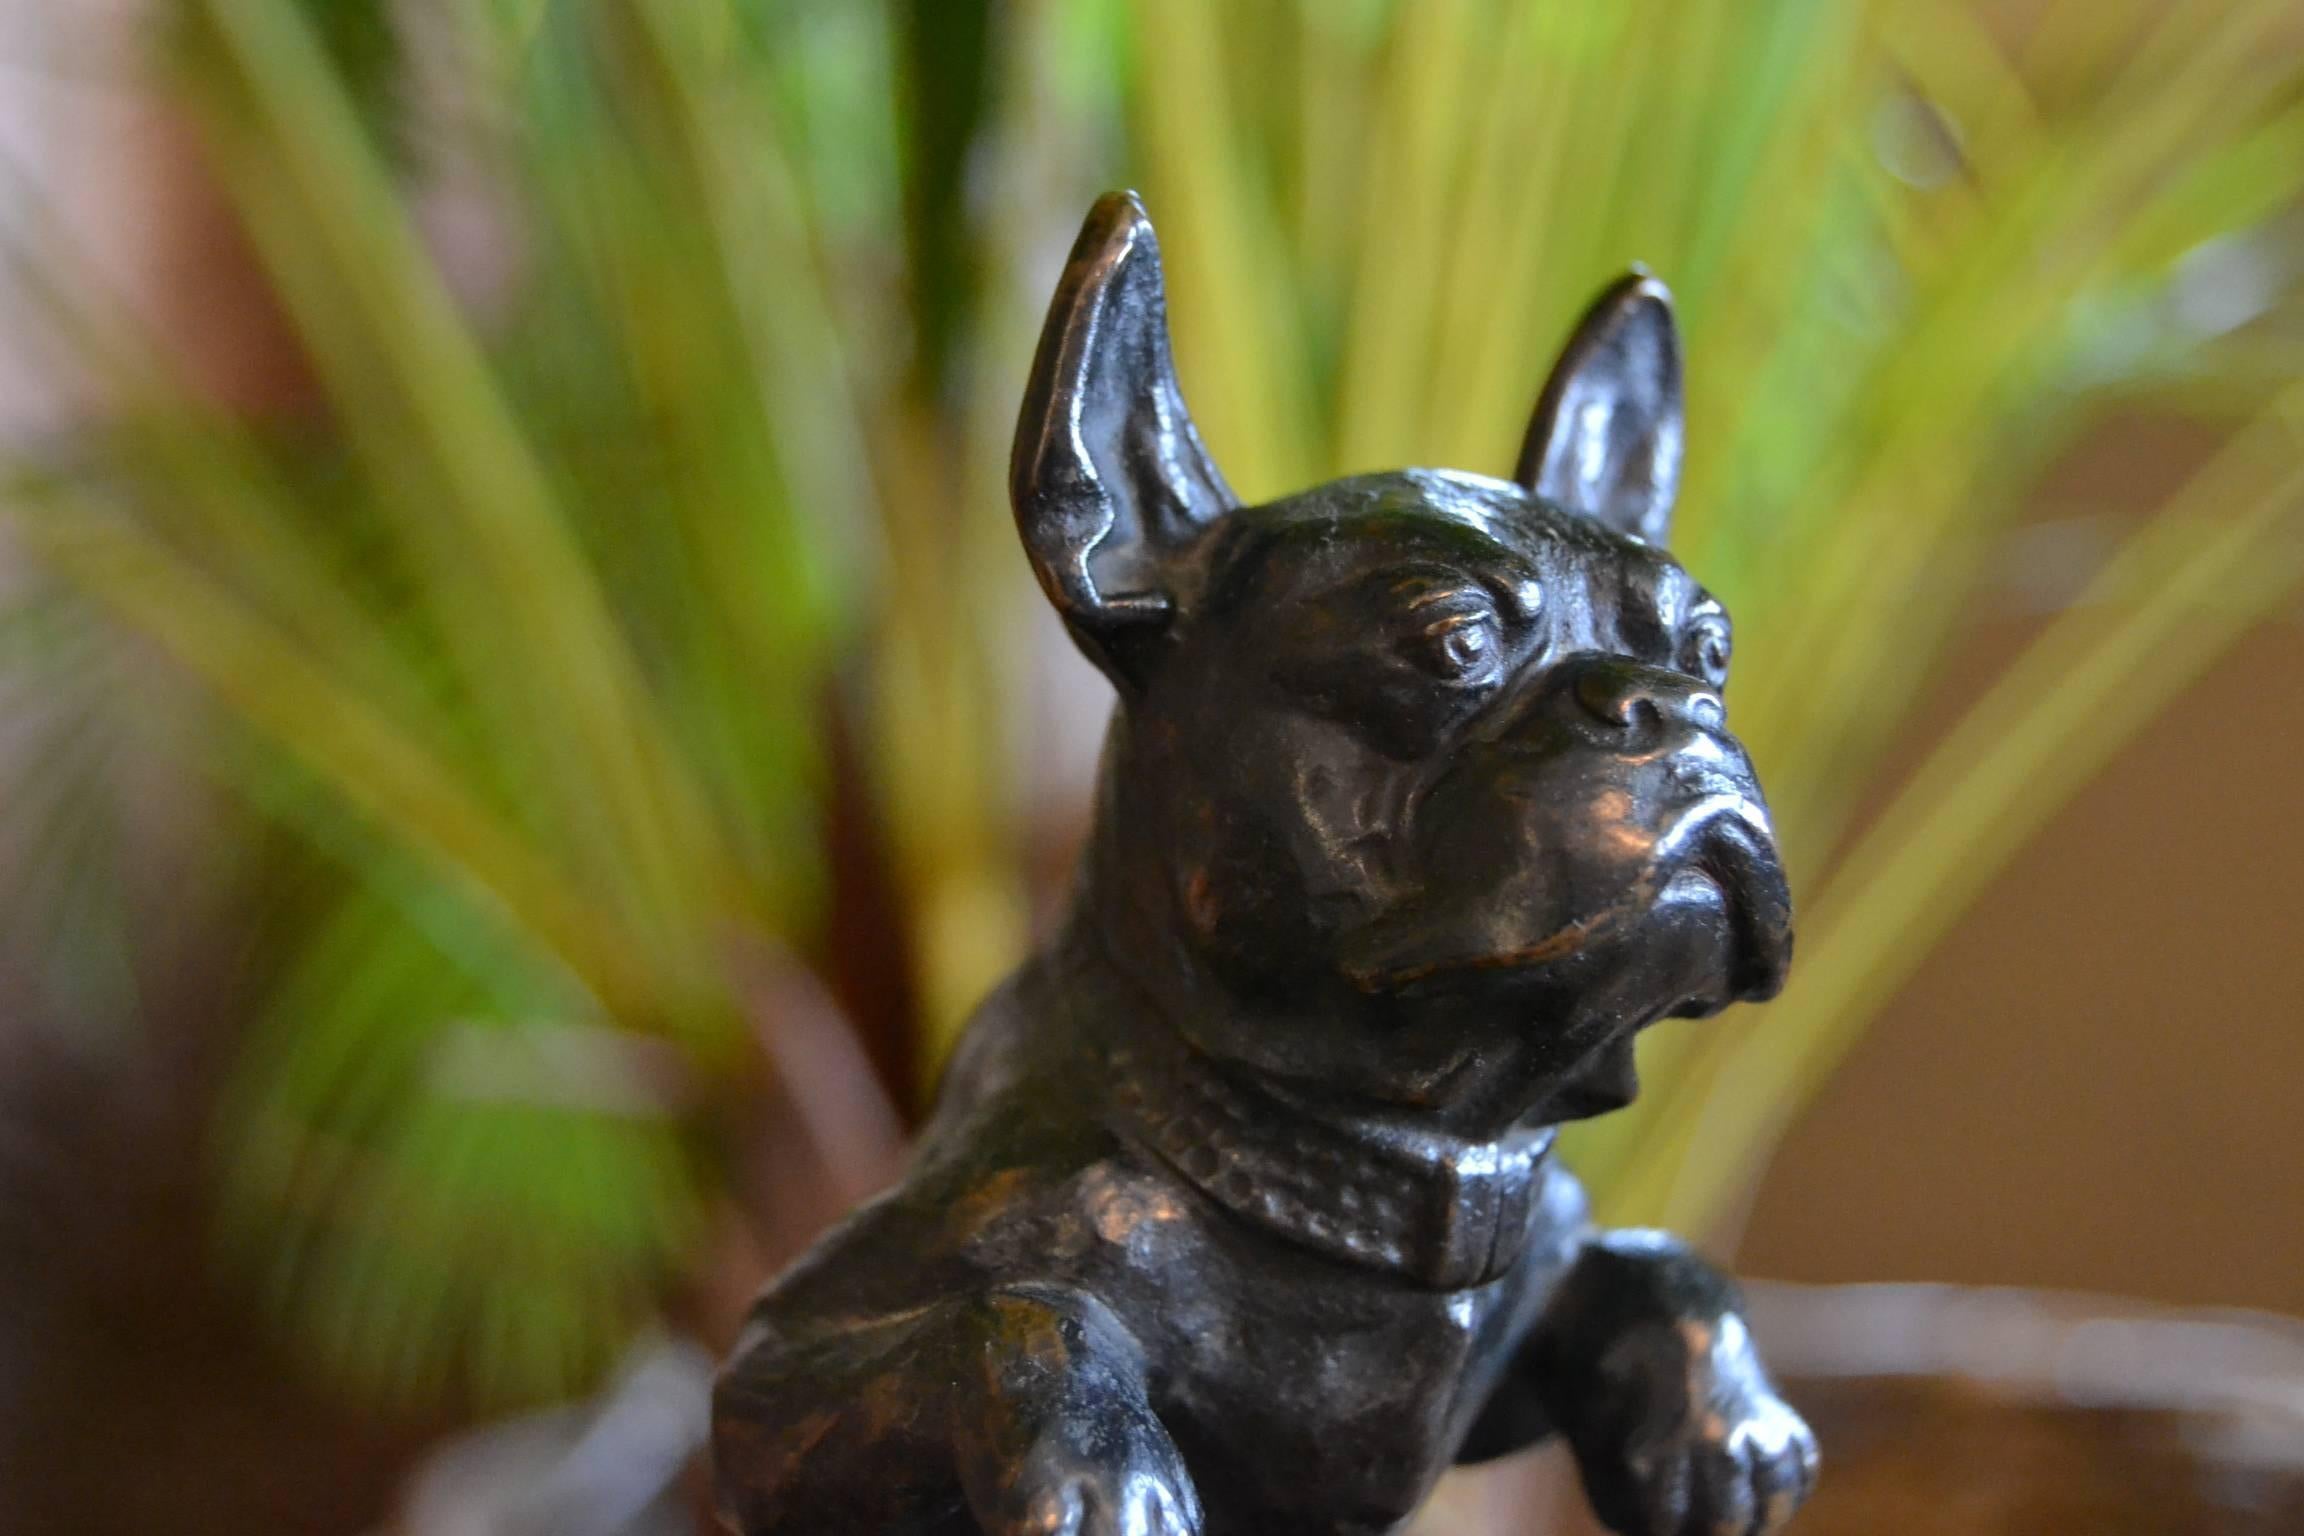 French bulldog statue - mascotte - desk accessory
Very detailed big male bronze dog figurine on black marble base.
This was probably a hood ornament given as a present for a prestigious event or company.